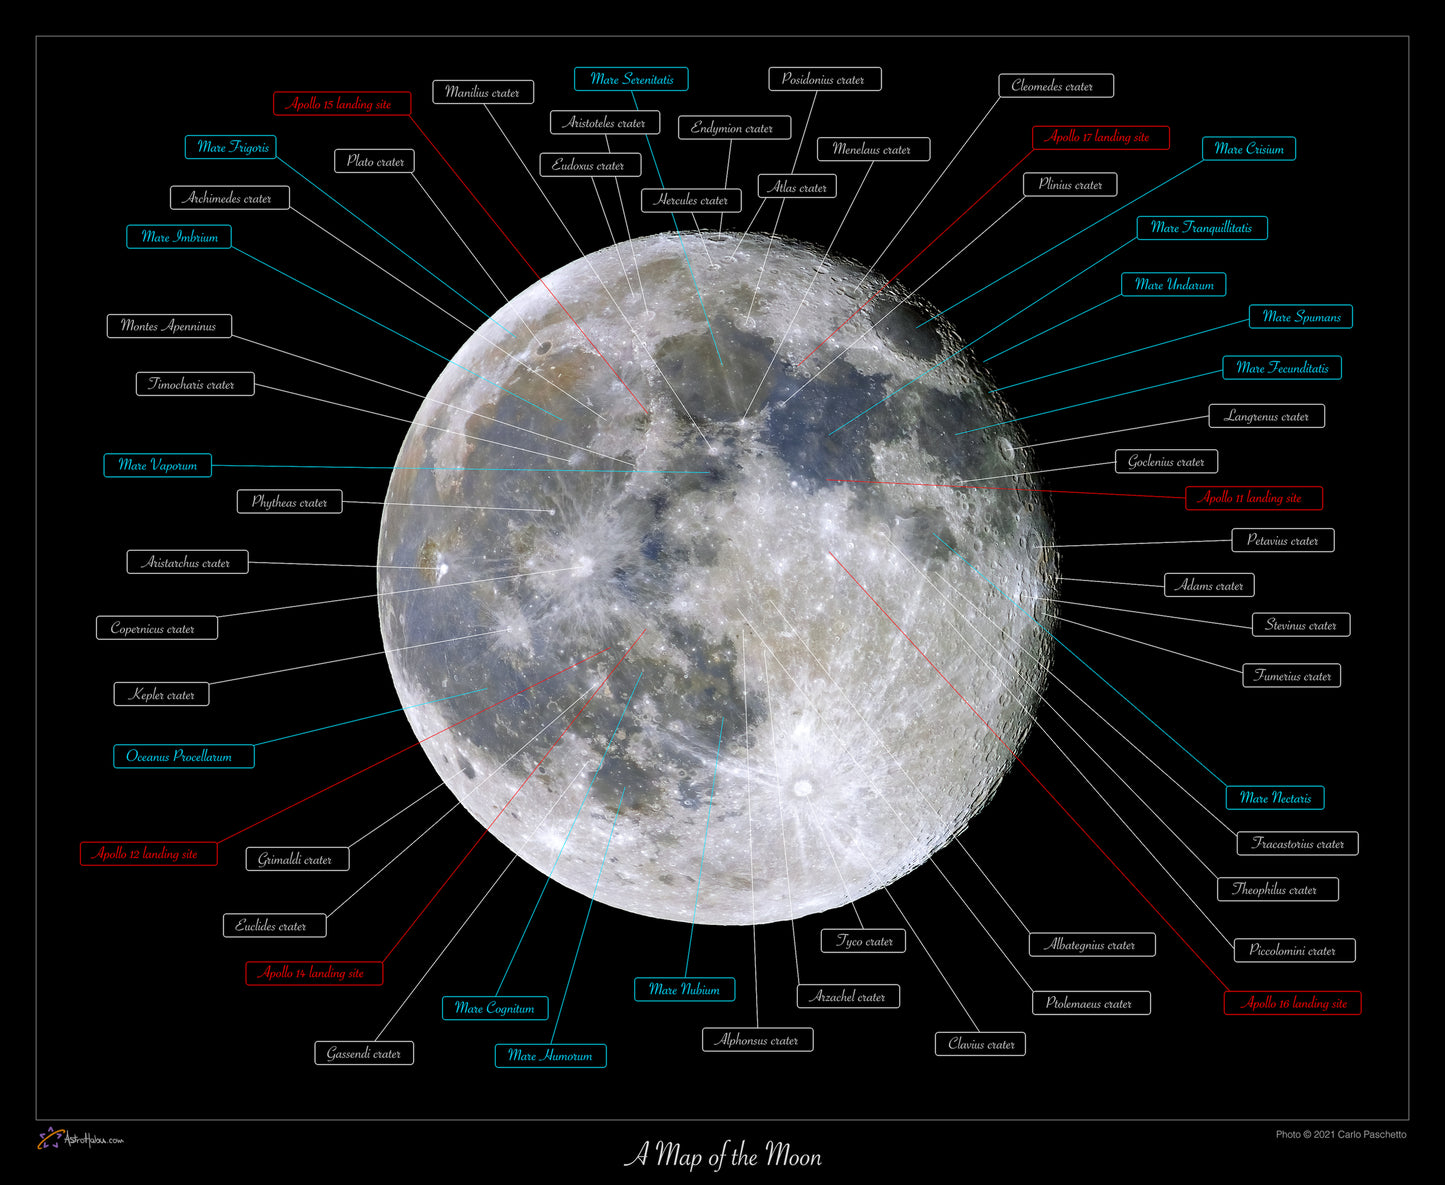 Map of the visible face of the Moon